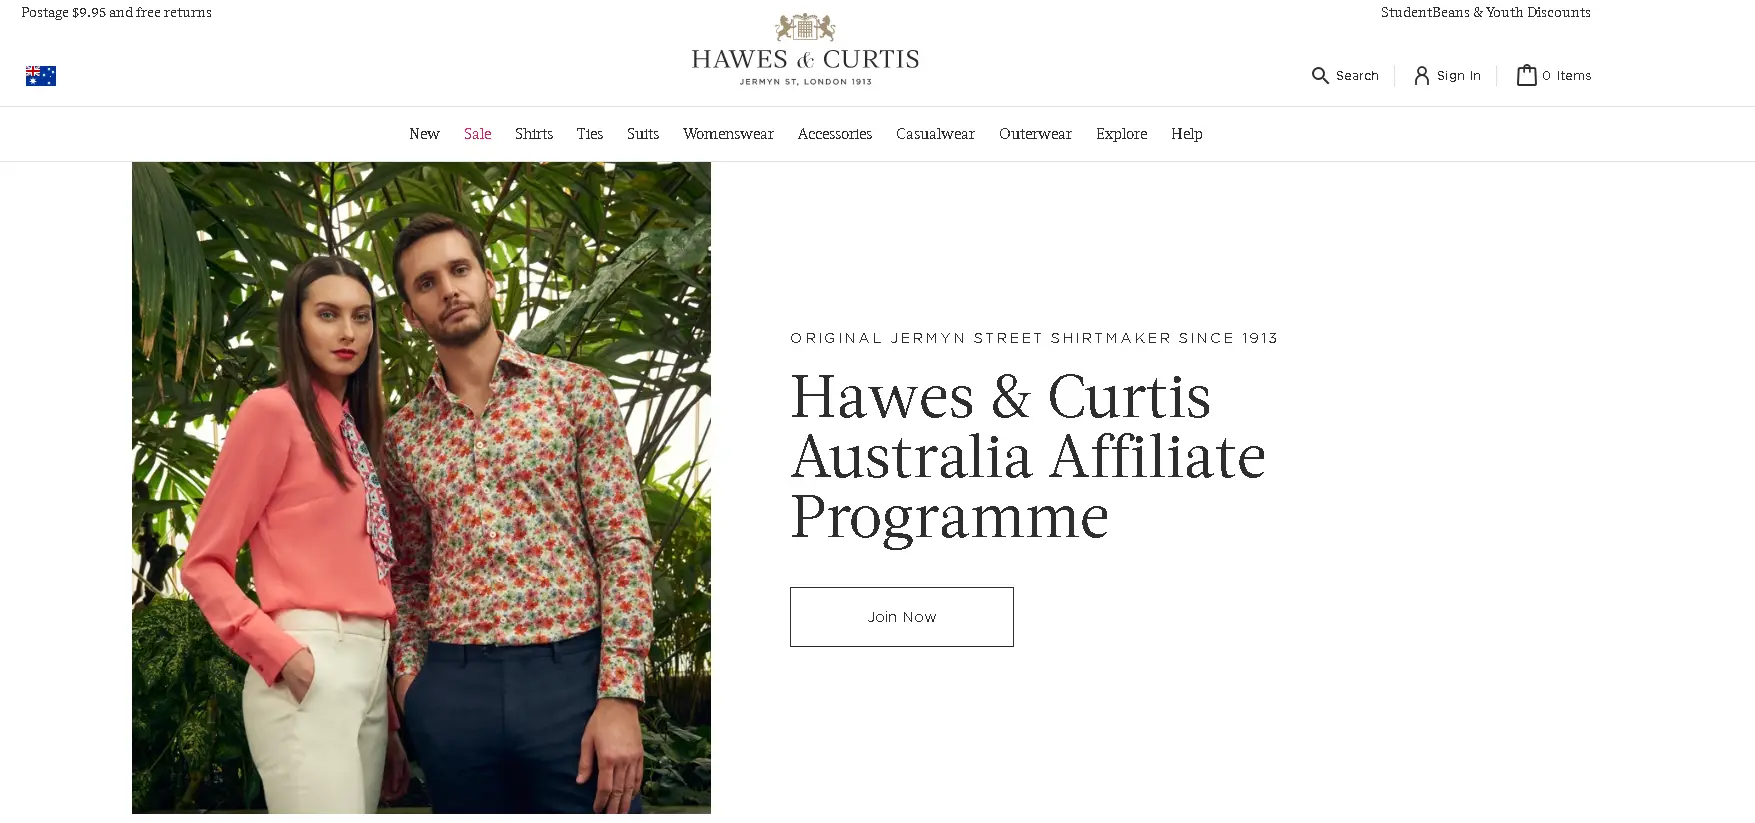 This is screen of the Hawes & Curtis website with a photo of the couple who run the business announcing their affiliate program. 